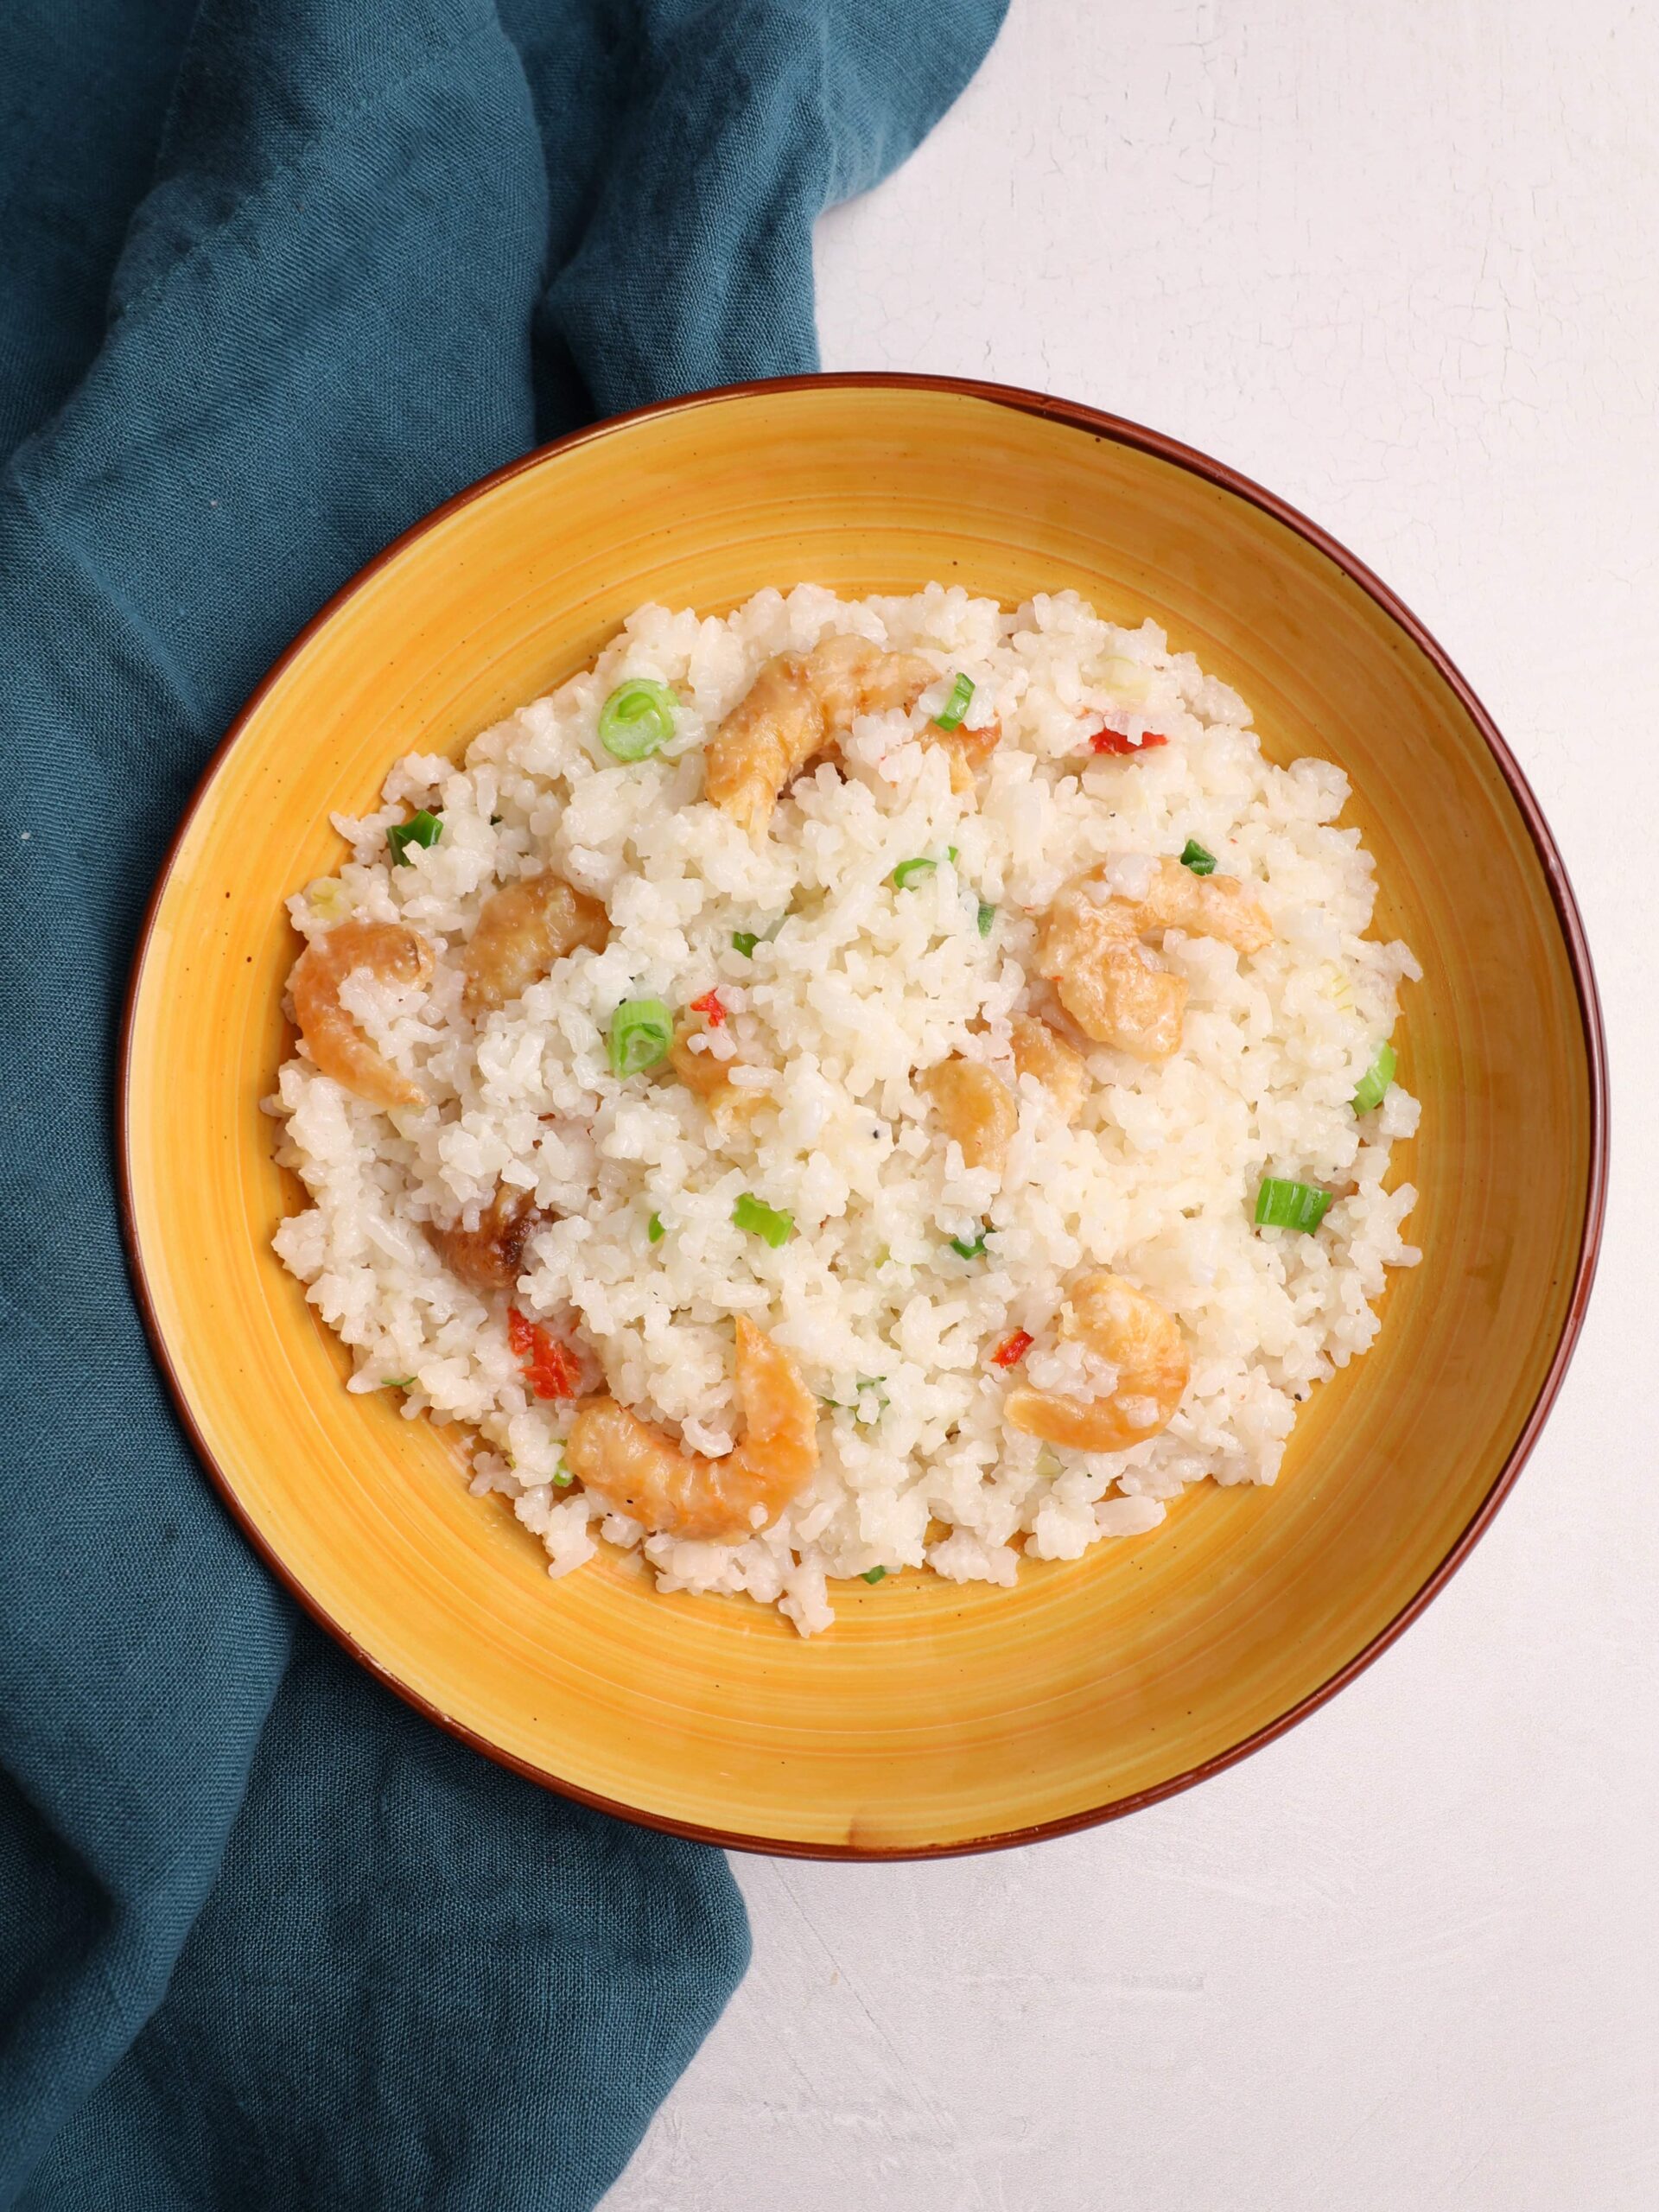 Guyanese shine rice with shrimp in a yellow bowl